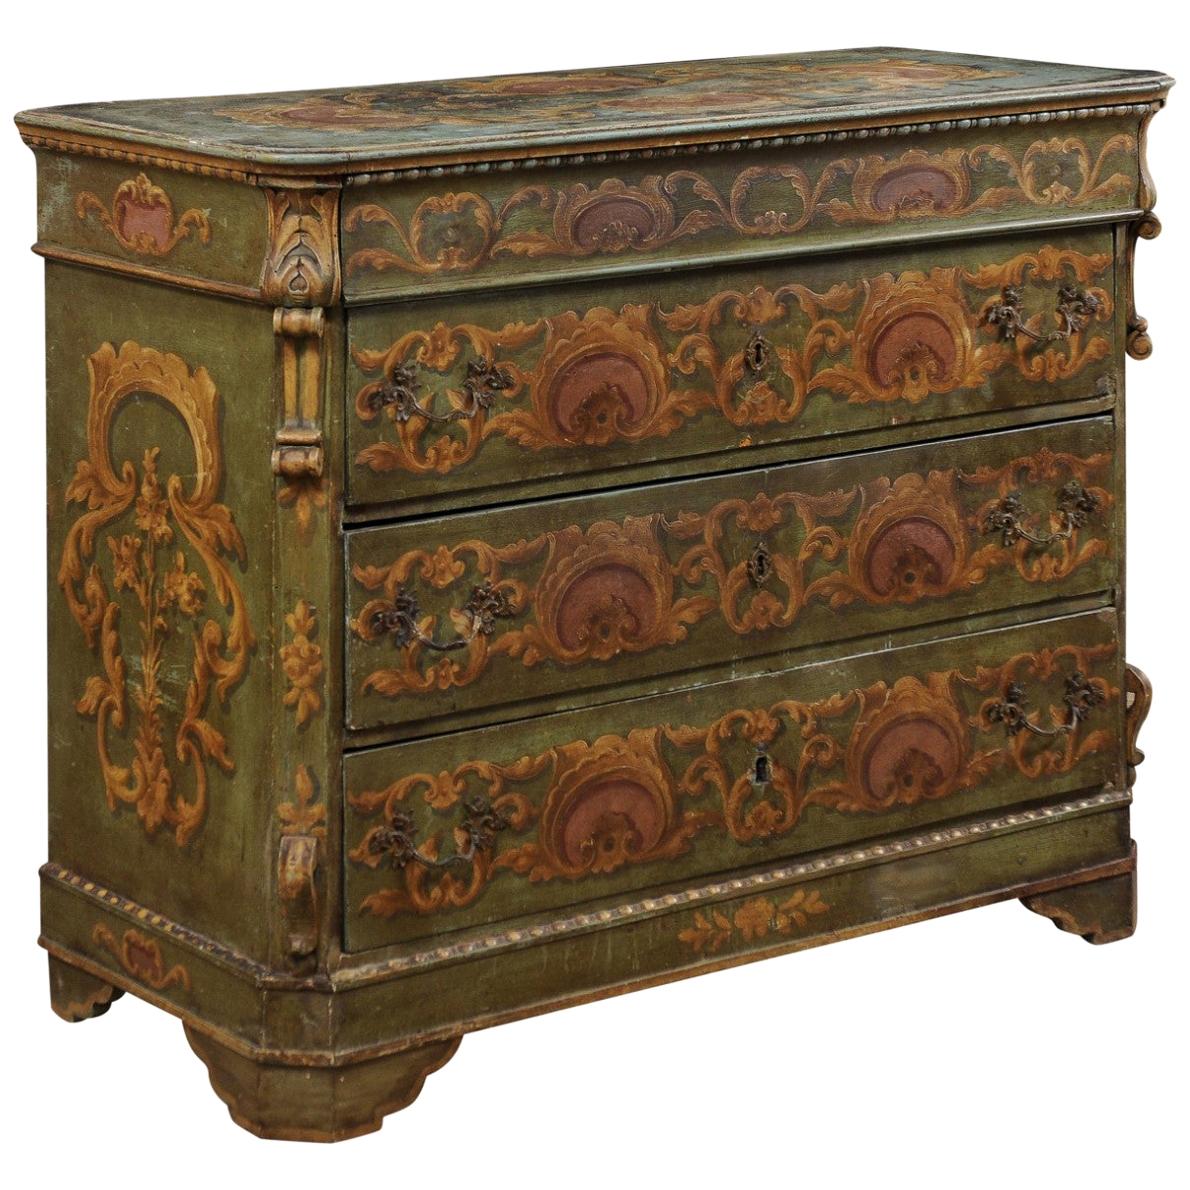 19th Century European Chest of Drawers with Original Decoratively Painted Finish